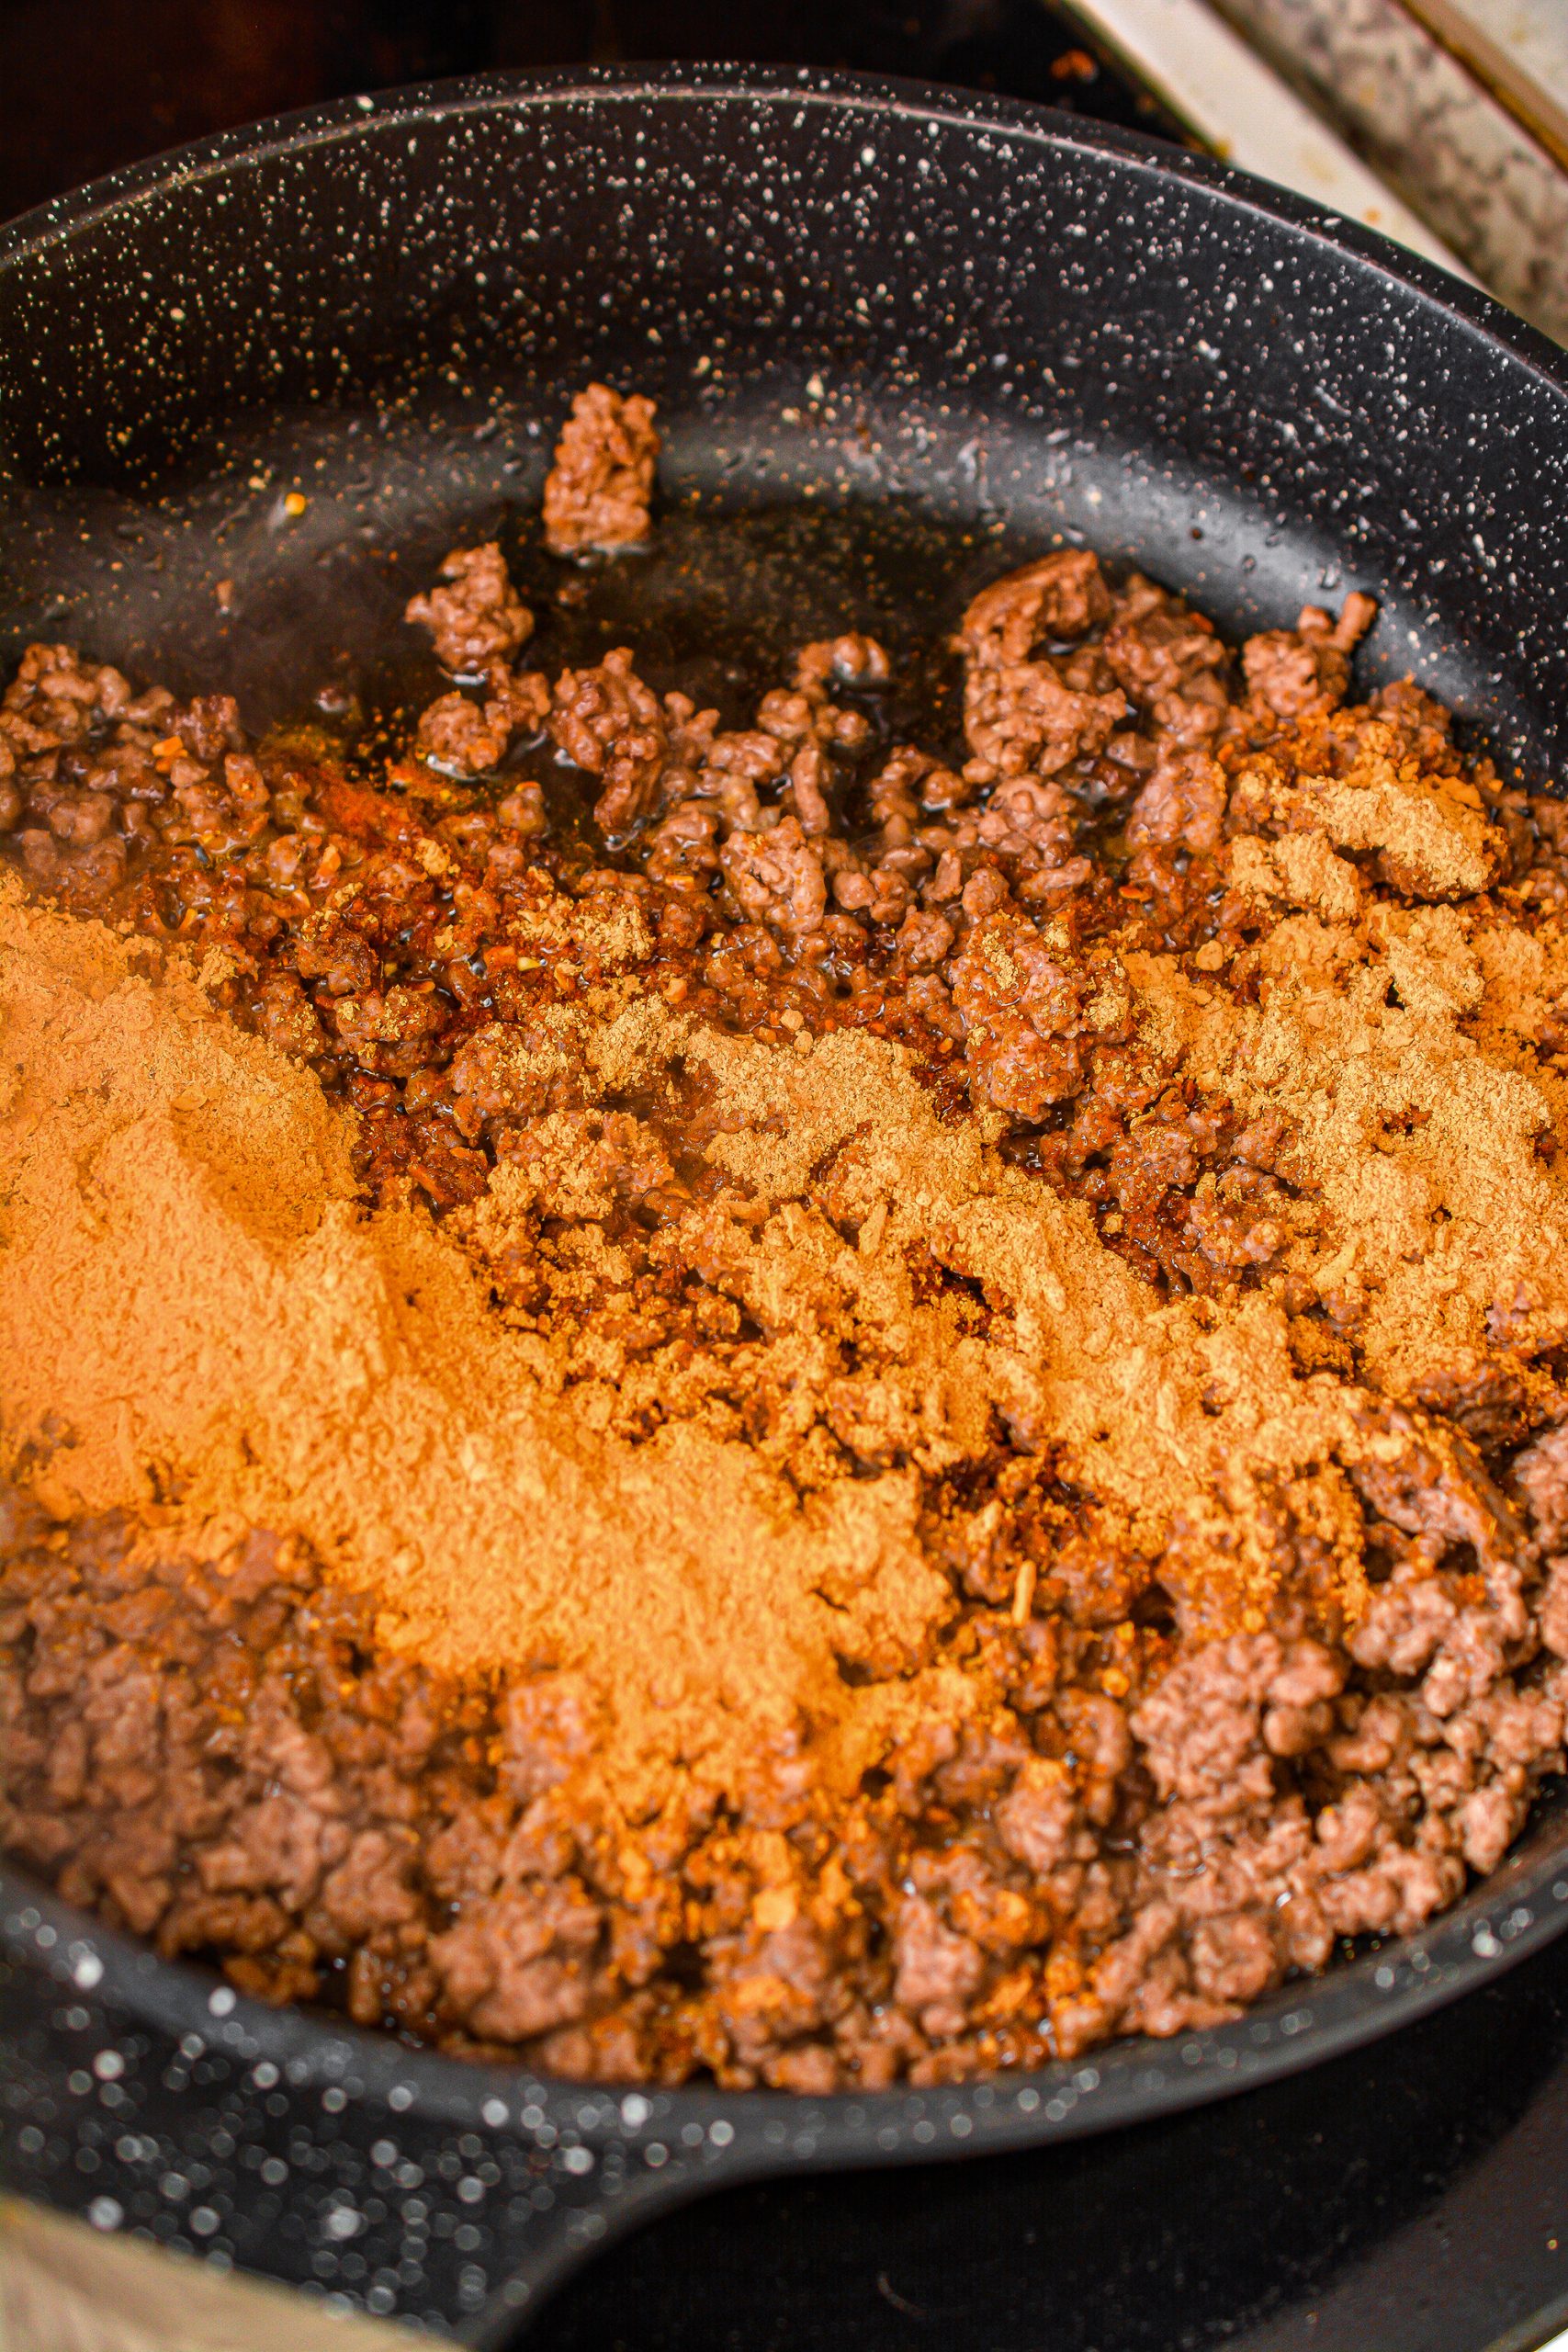 Reduce the heat in the skillet to medium and stir in the taco seasoning.